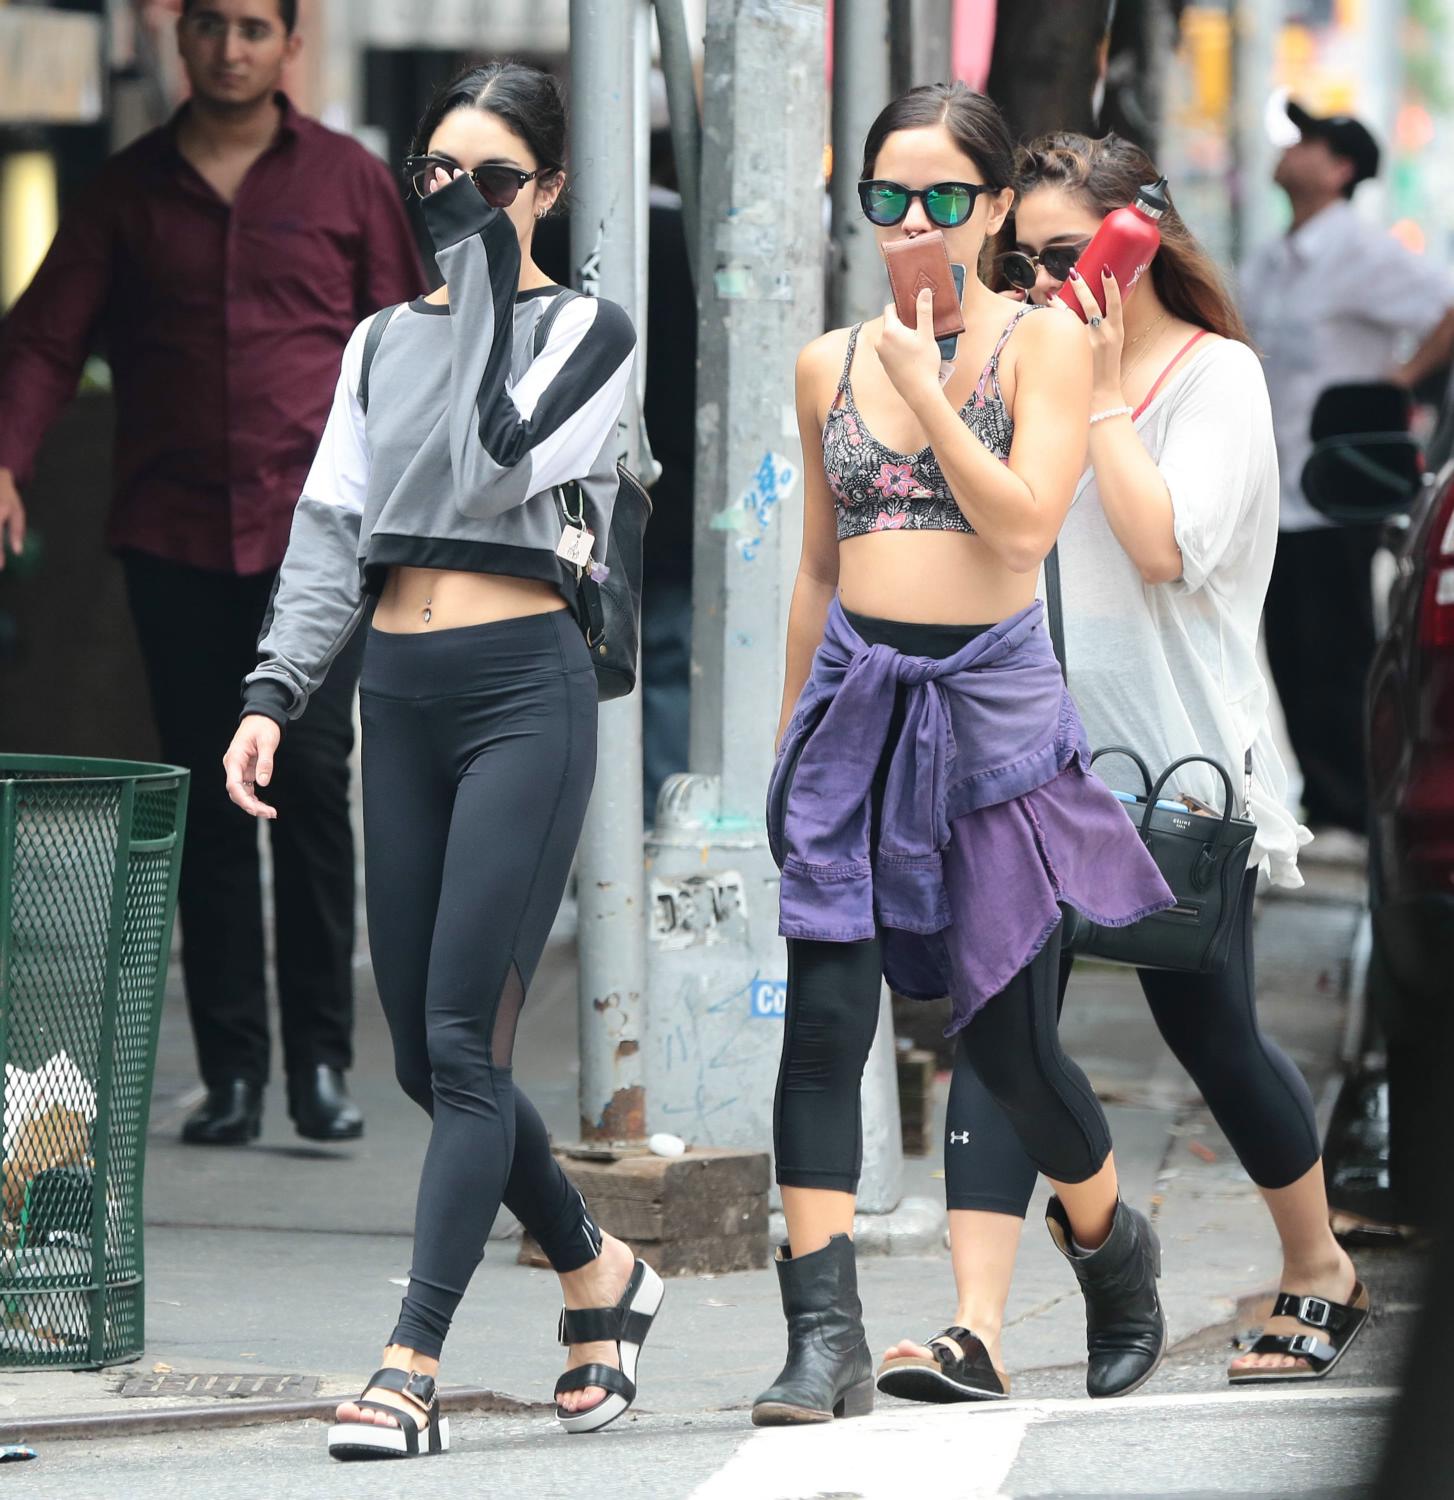 Vanessa Hudgens and A Friend in NYC – Celeb Donut